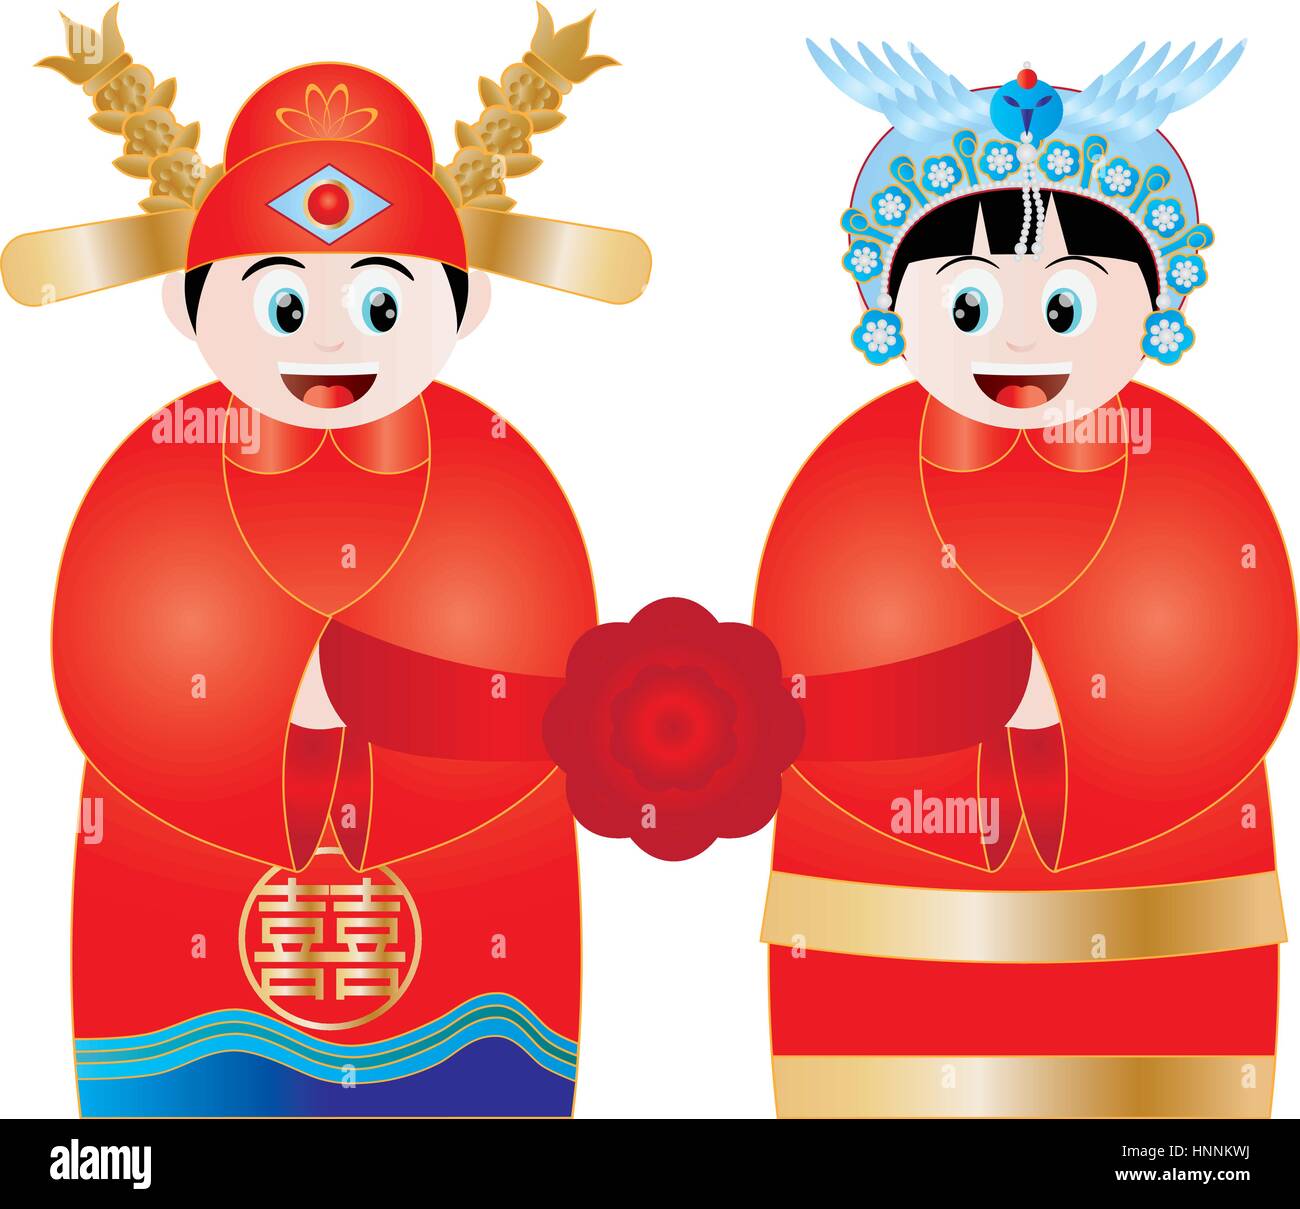 Chinese Wedding Couple In Traditional Royal Costumes With Double Happiness Text Illustration